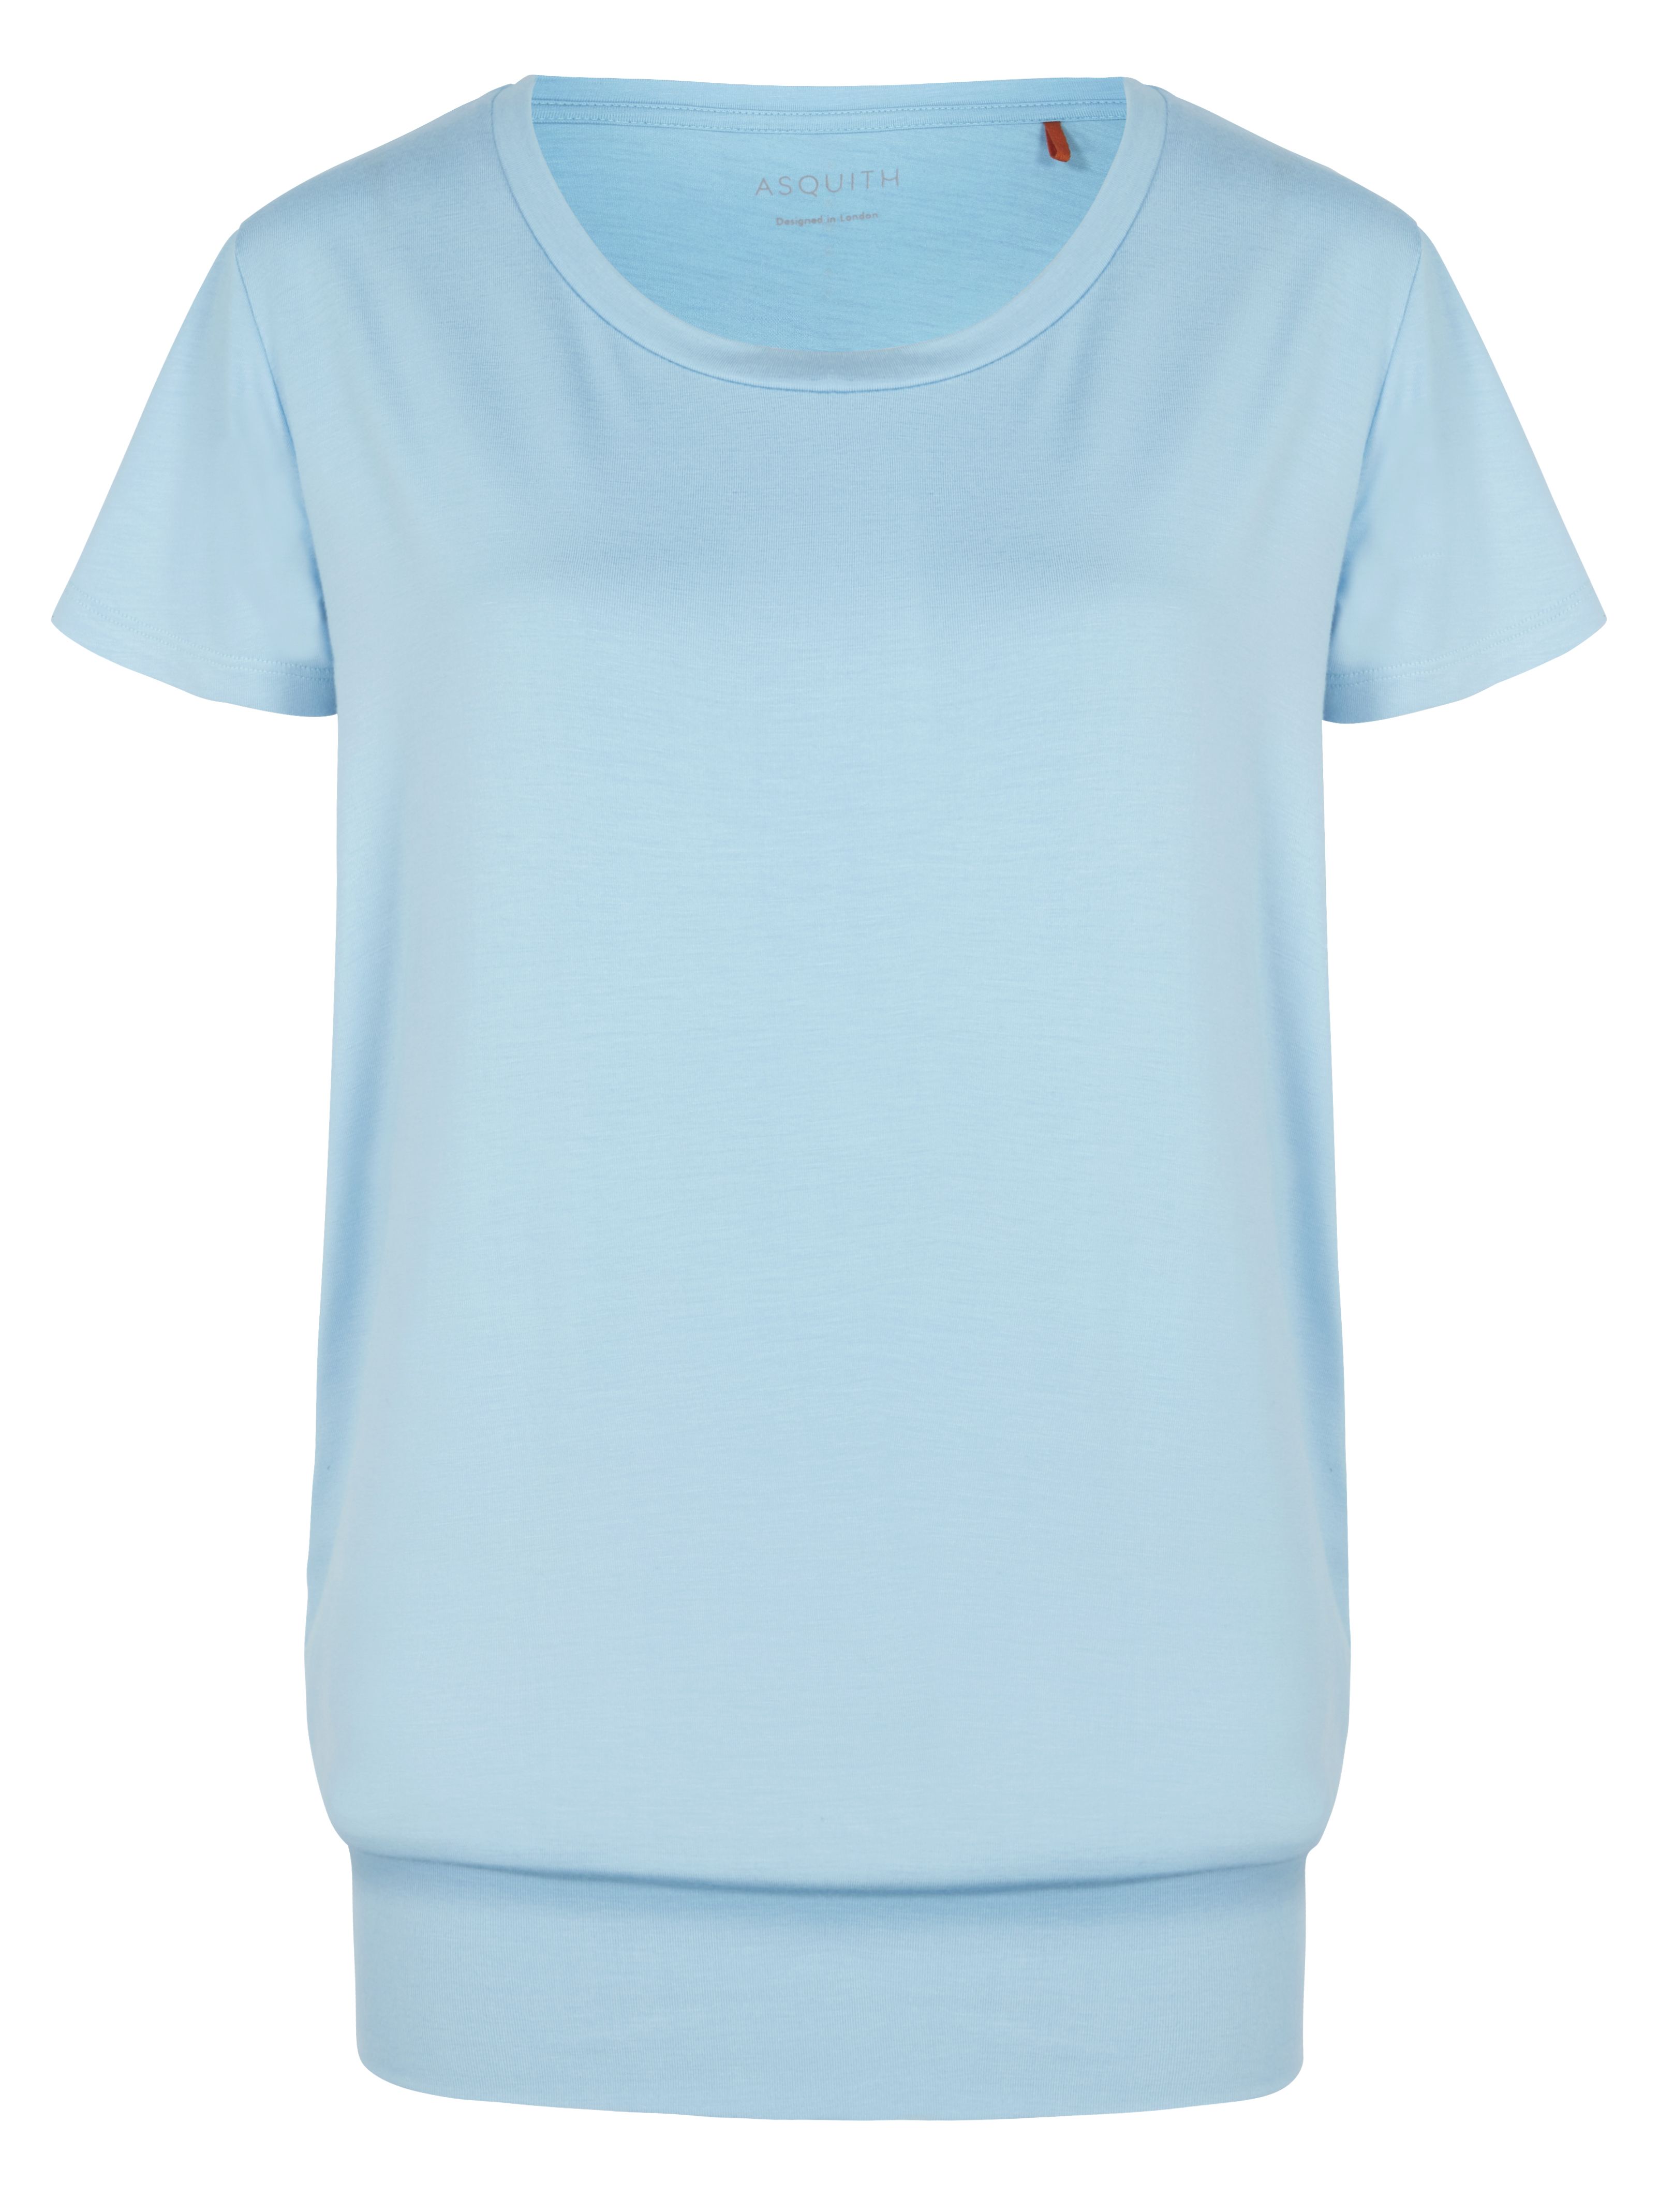 Asquith Smooth You Tee - Baby Blue